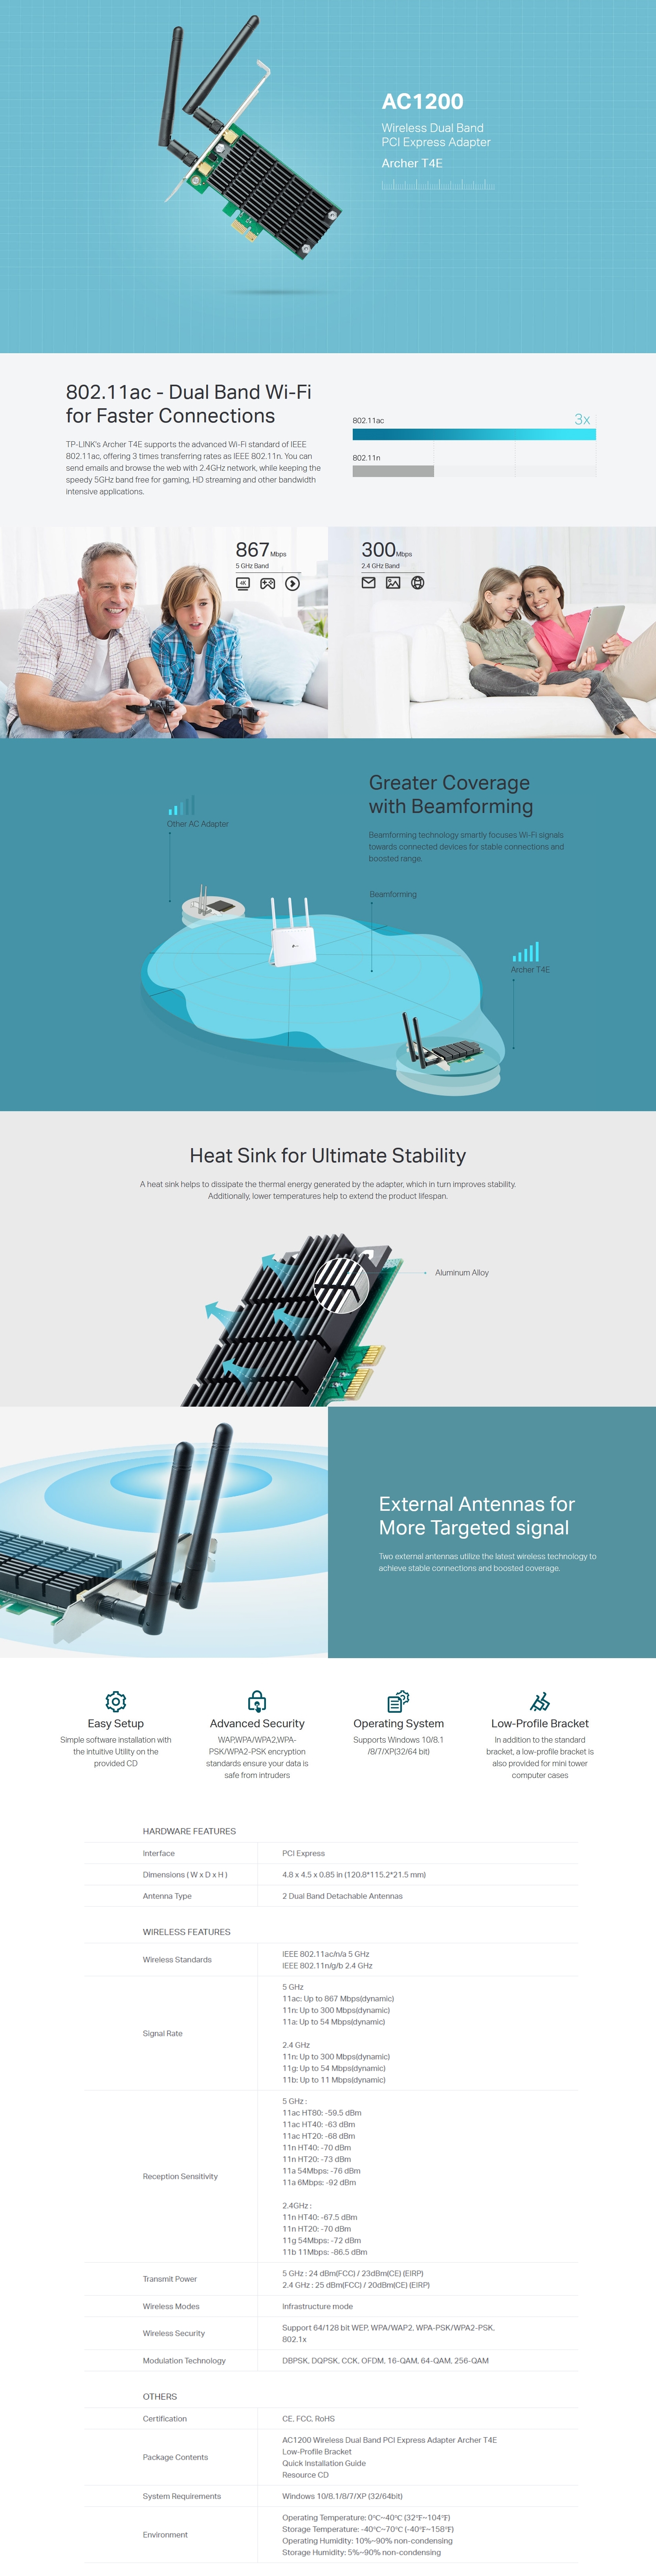 A large marketing image providing additional information about the product TP-Link Archer T4E AC1200 Wireless Dual Band PCI Express Adapter - Additional alt info not provided